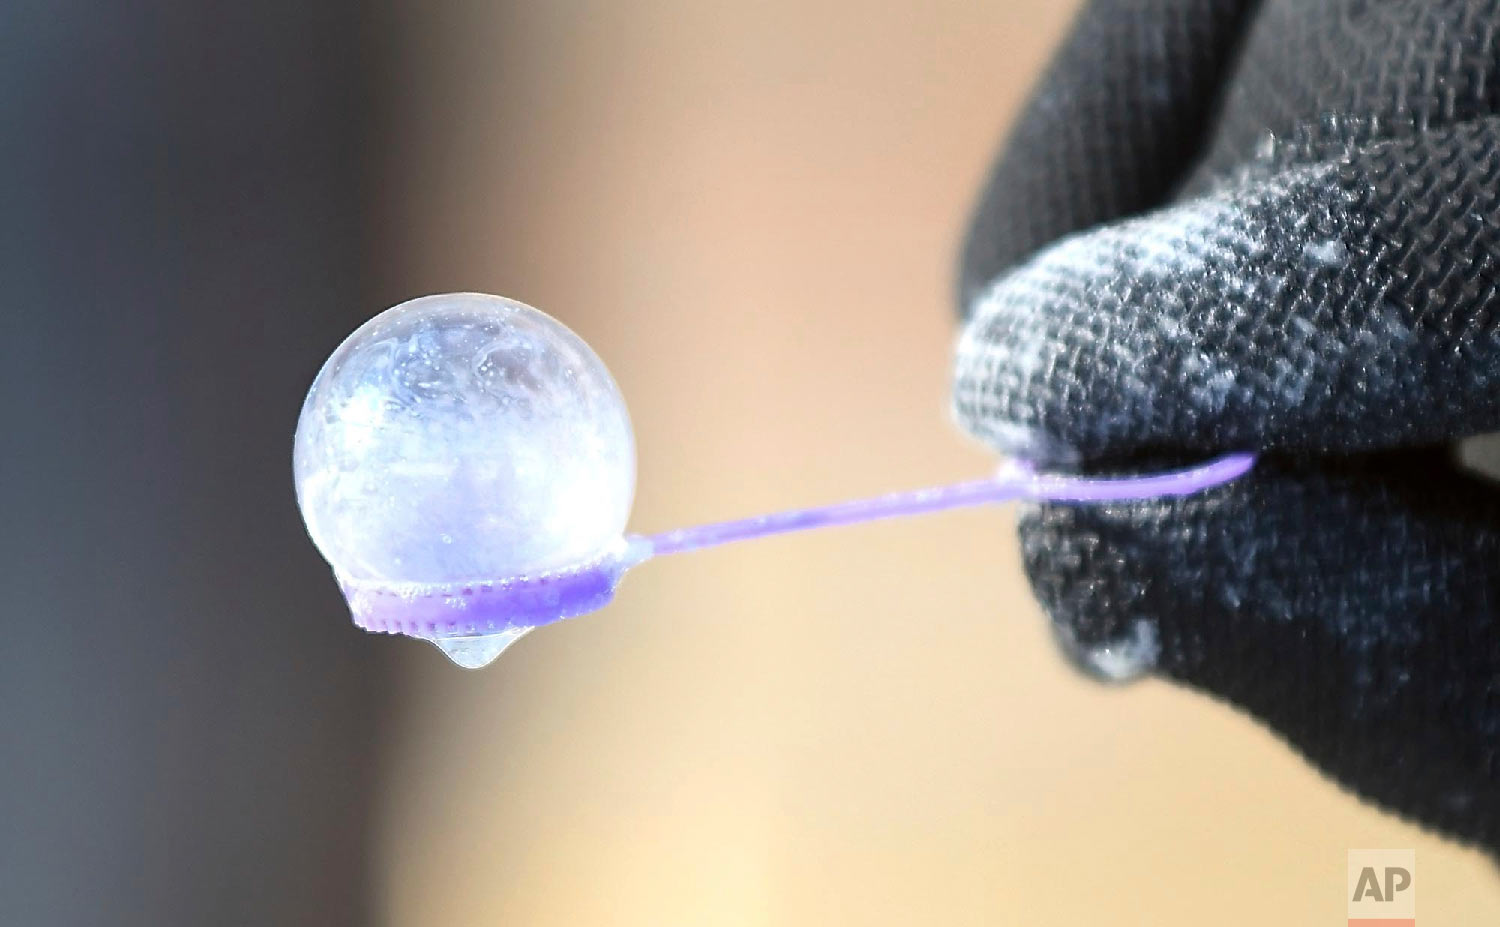  A bubble freezes on the end of the wand Wednesday, Jan. 30, 2019, in Mankato, Minn. (Pat Christman/The Free Press via AP) 